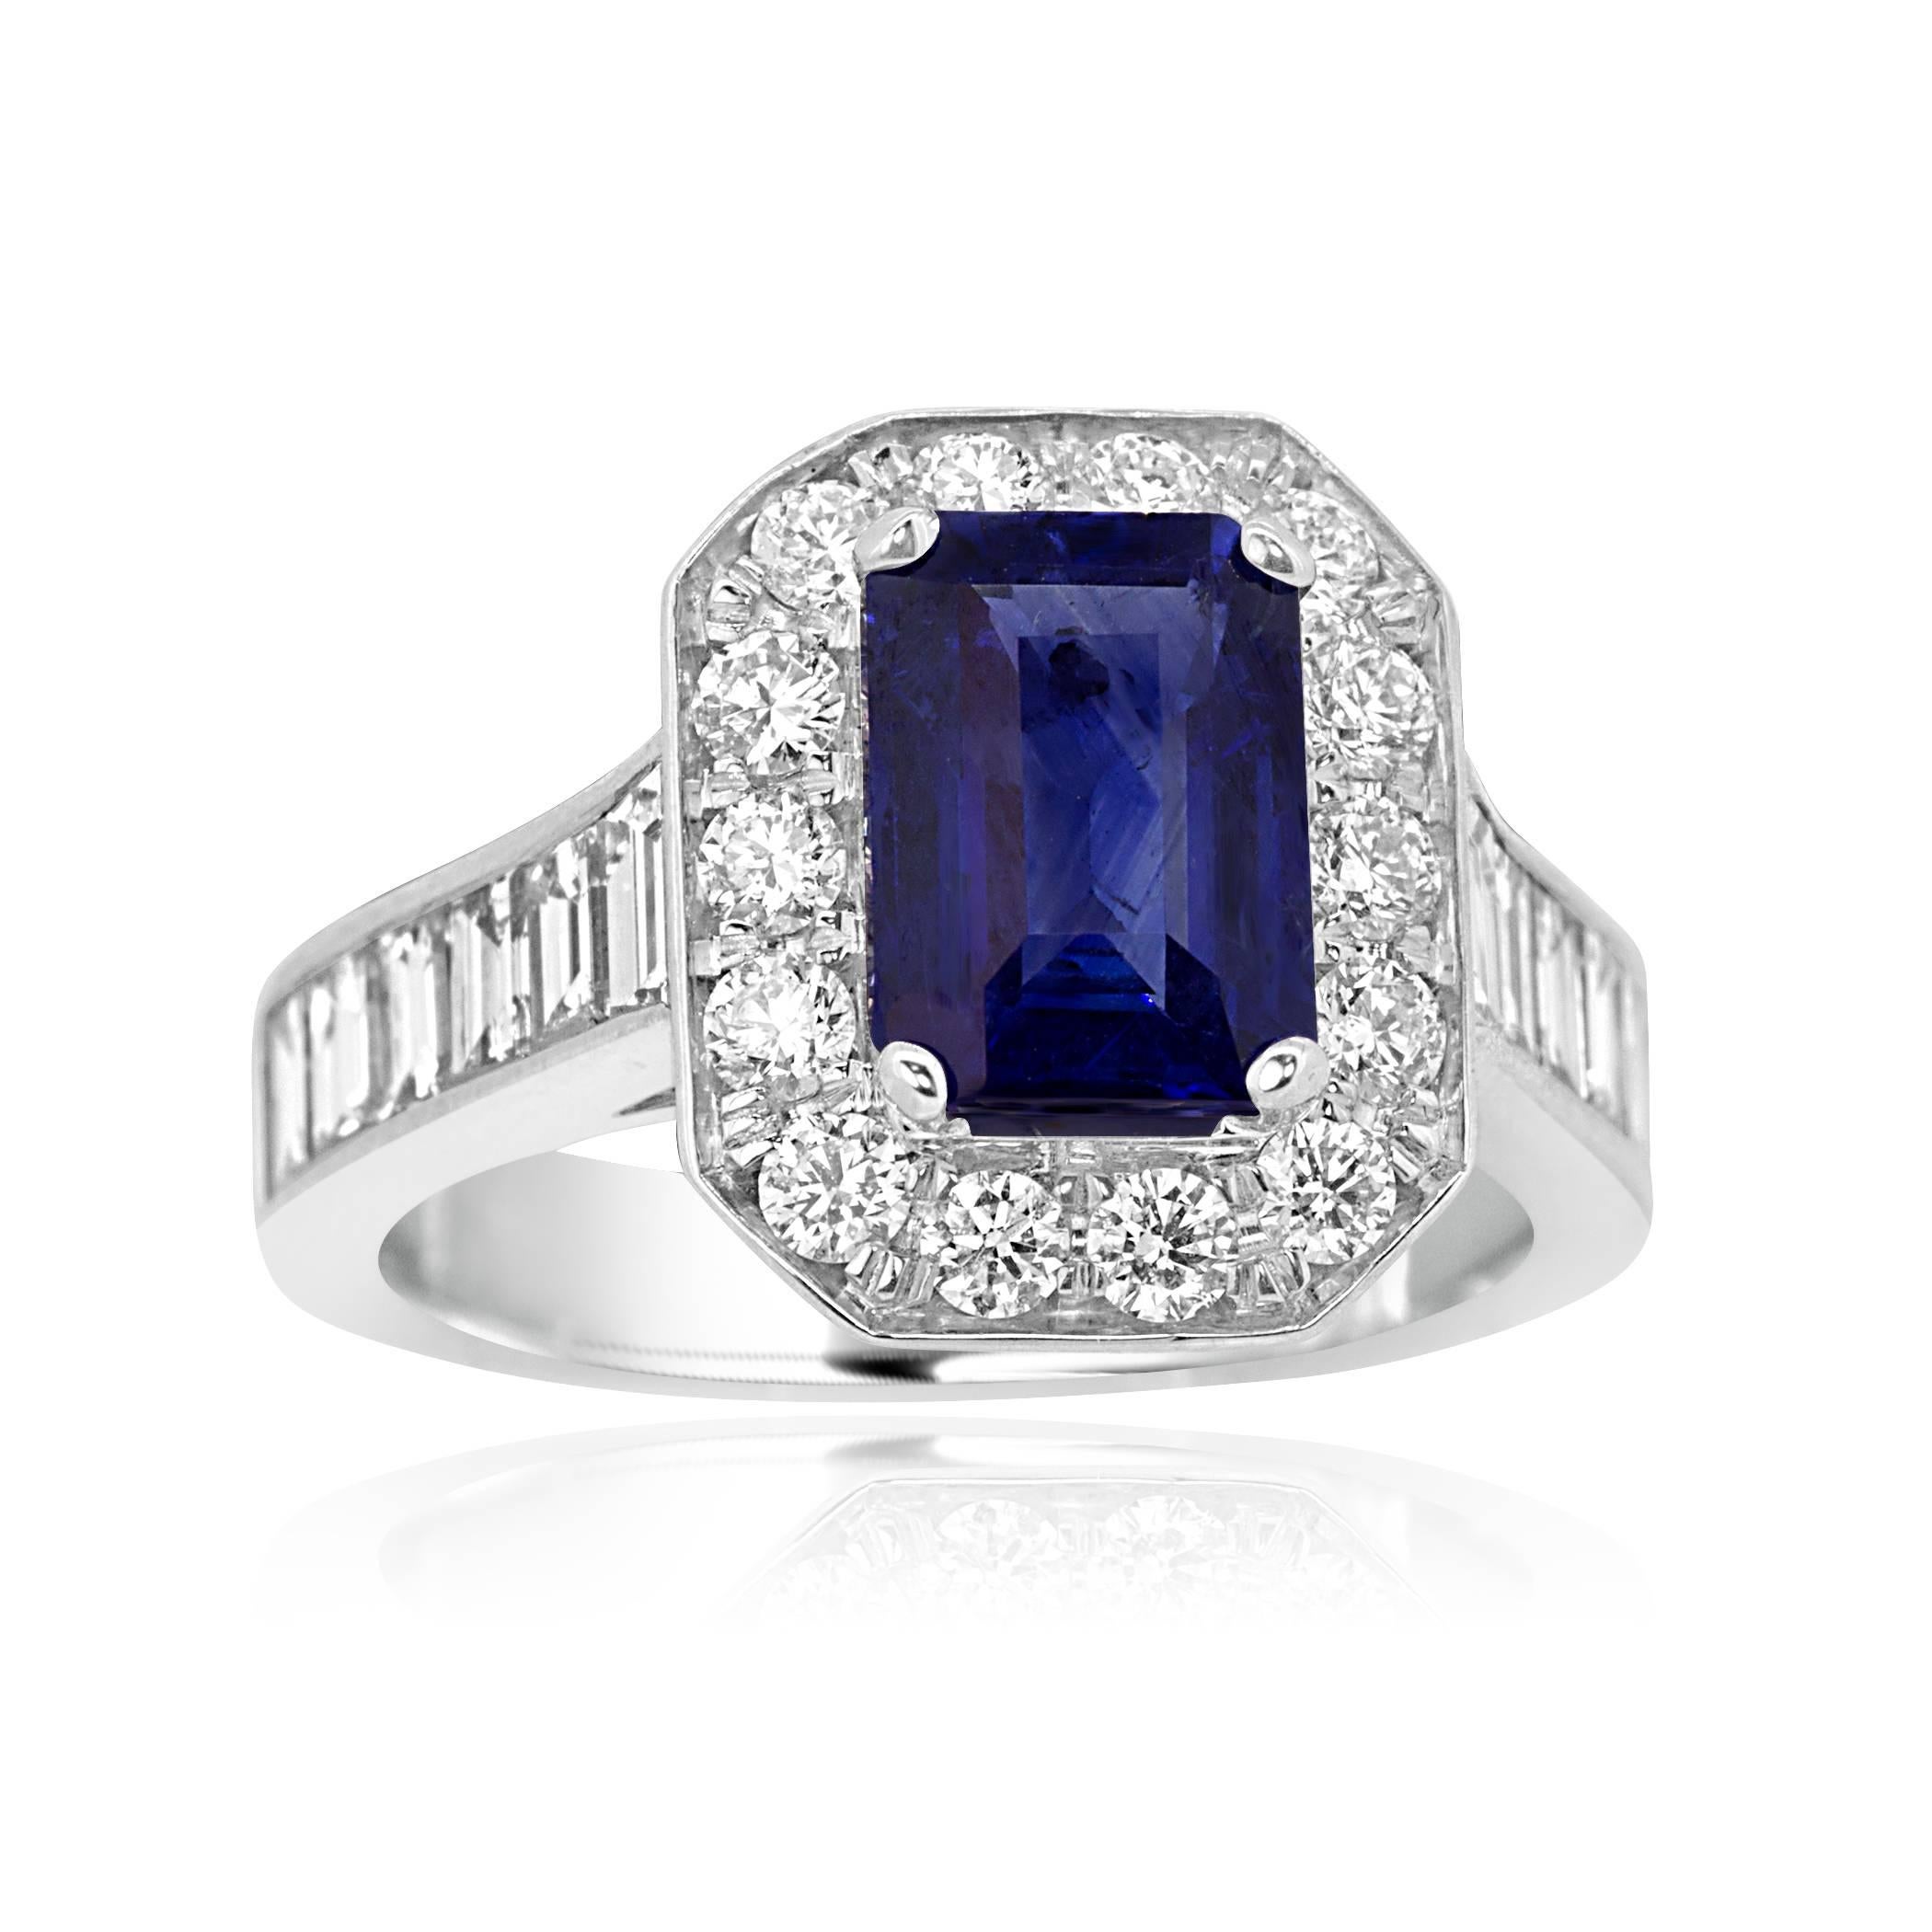 Heated Emerald Cut Blue Sapphire 2.53 encircled in a halo of white diamond 0.57 Carat Flanked by baguette shape white Diamonds on the shank 1.31 Carat in 18K white gold. 
MADE IN USA.

Blue Sapphire 2.53 Carat
Diamond total weight 1.88 Carat